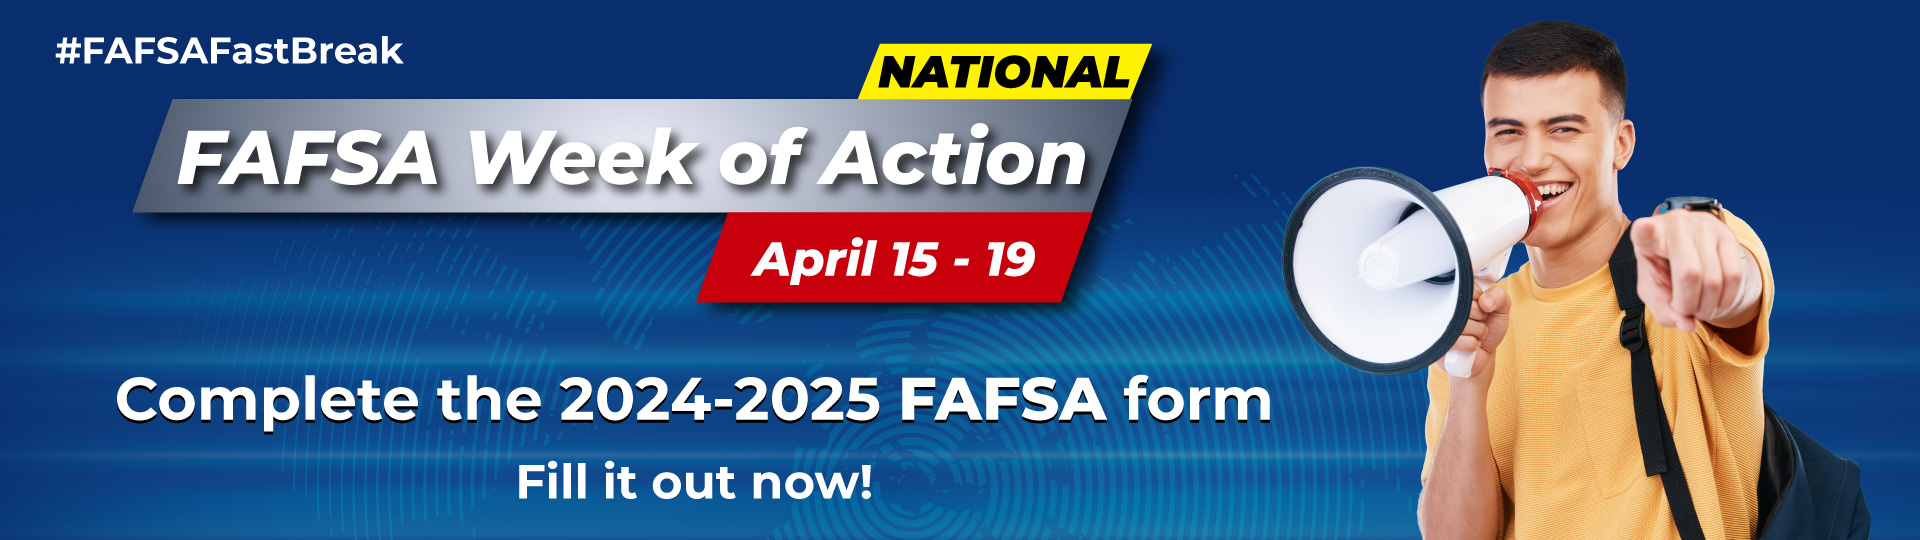 National FAFSA Week of Action